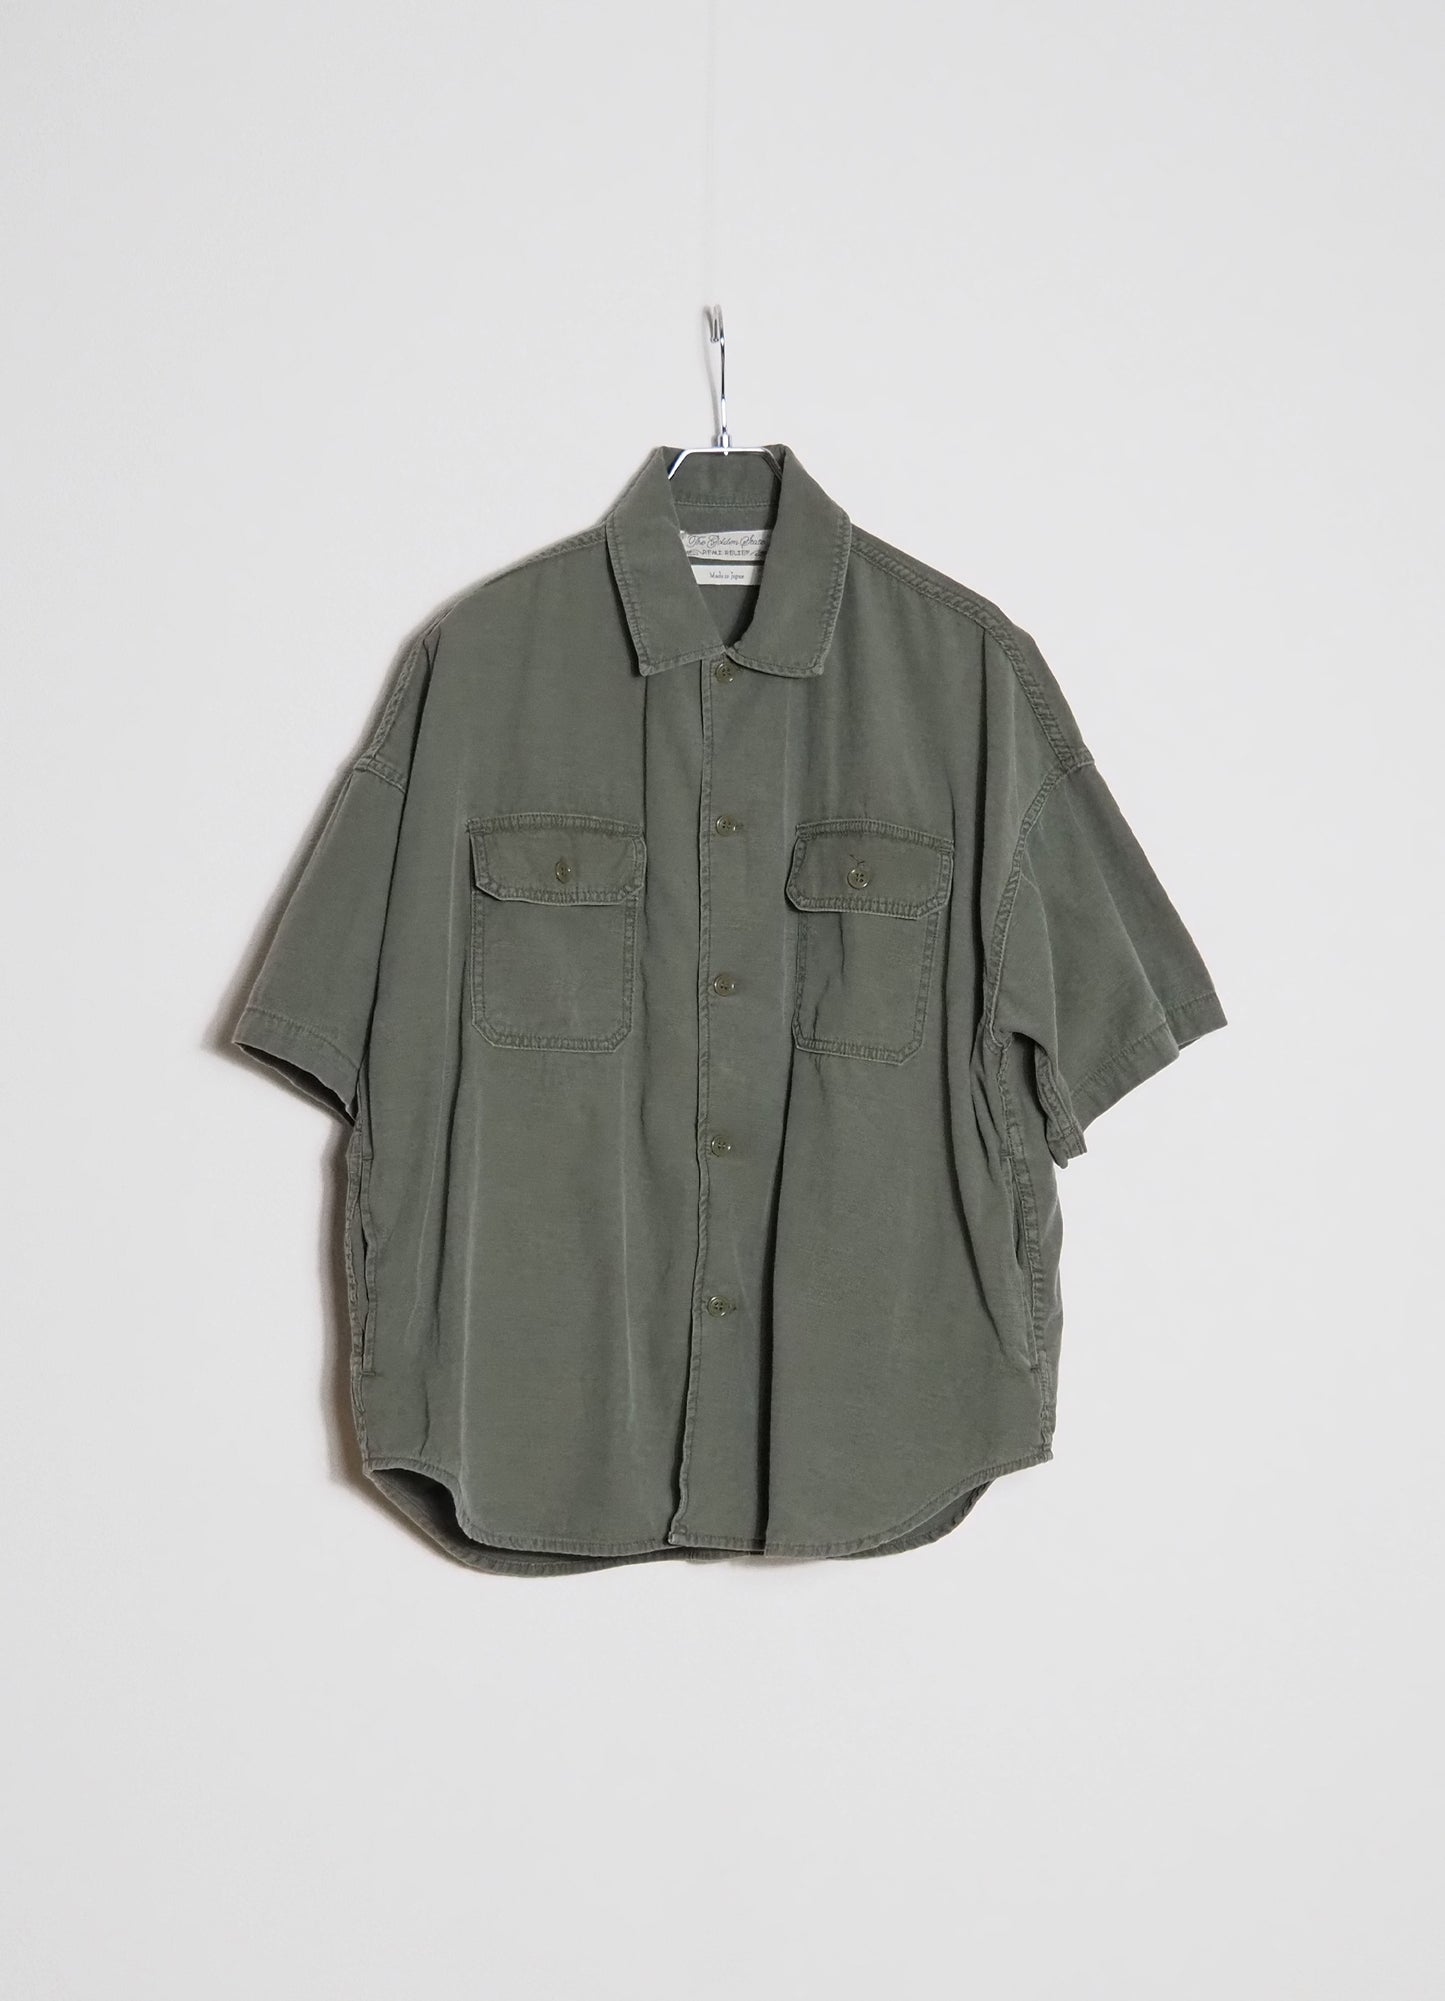 WIDE Military S/S SHIRT [RN26349070]